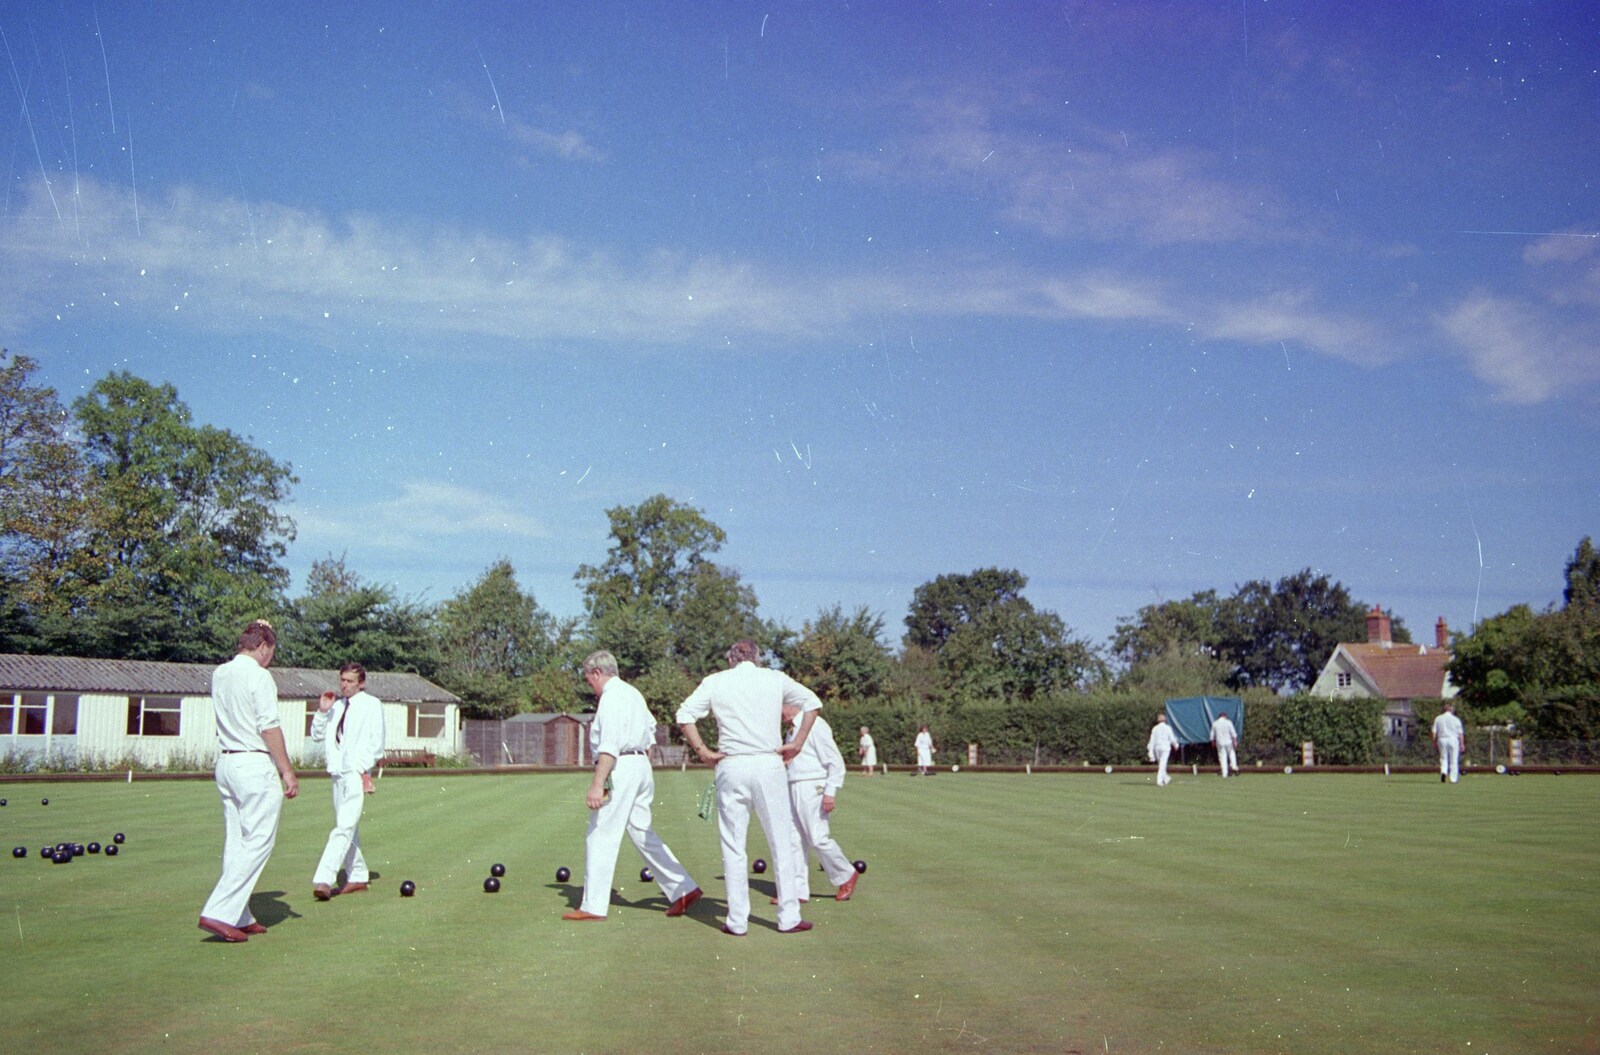 Down at the Eye bowls club from Cider Making With Geoff and Brenda, Stuston, Suffolk - 10th September 1998